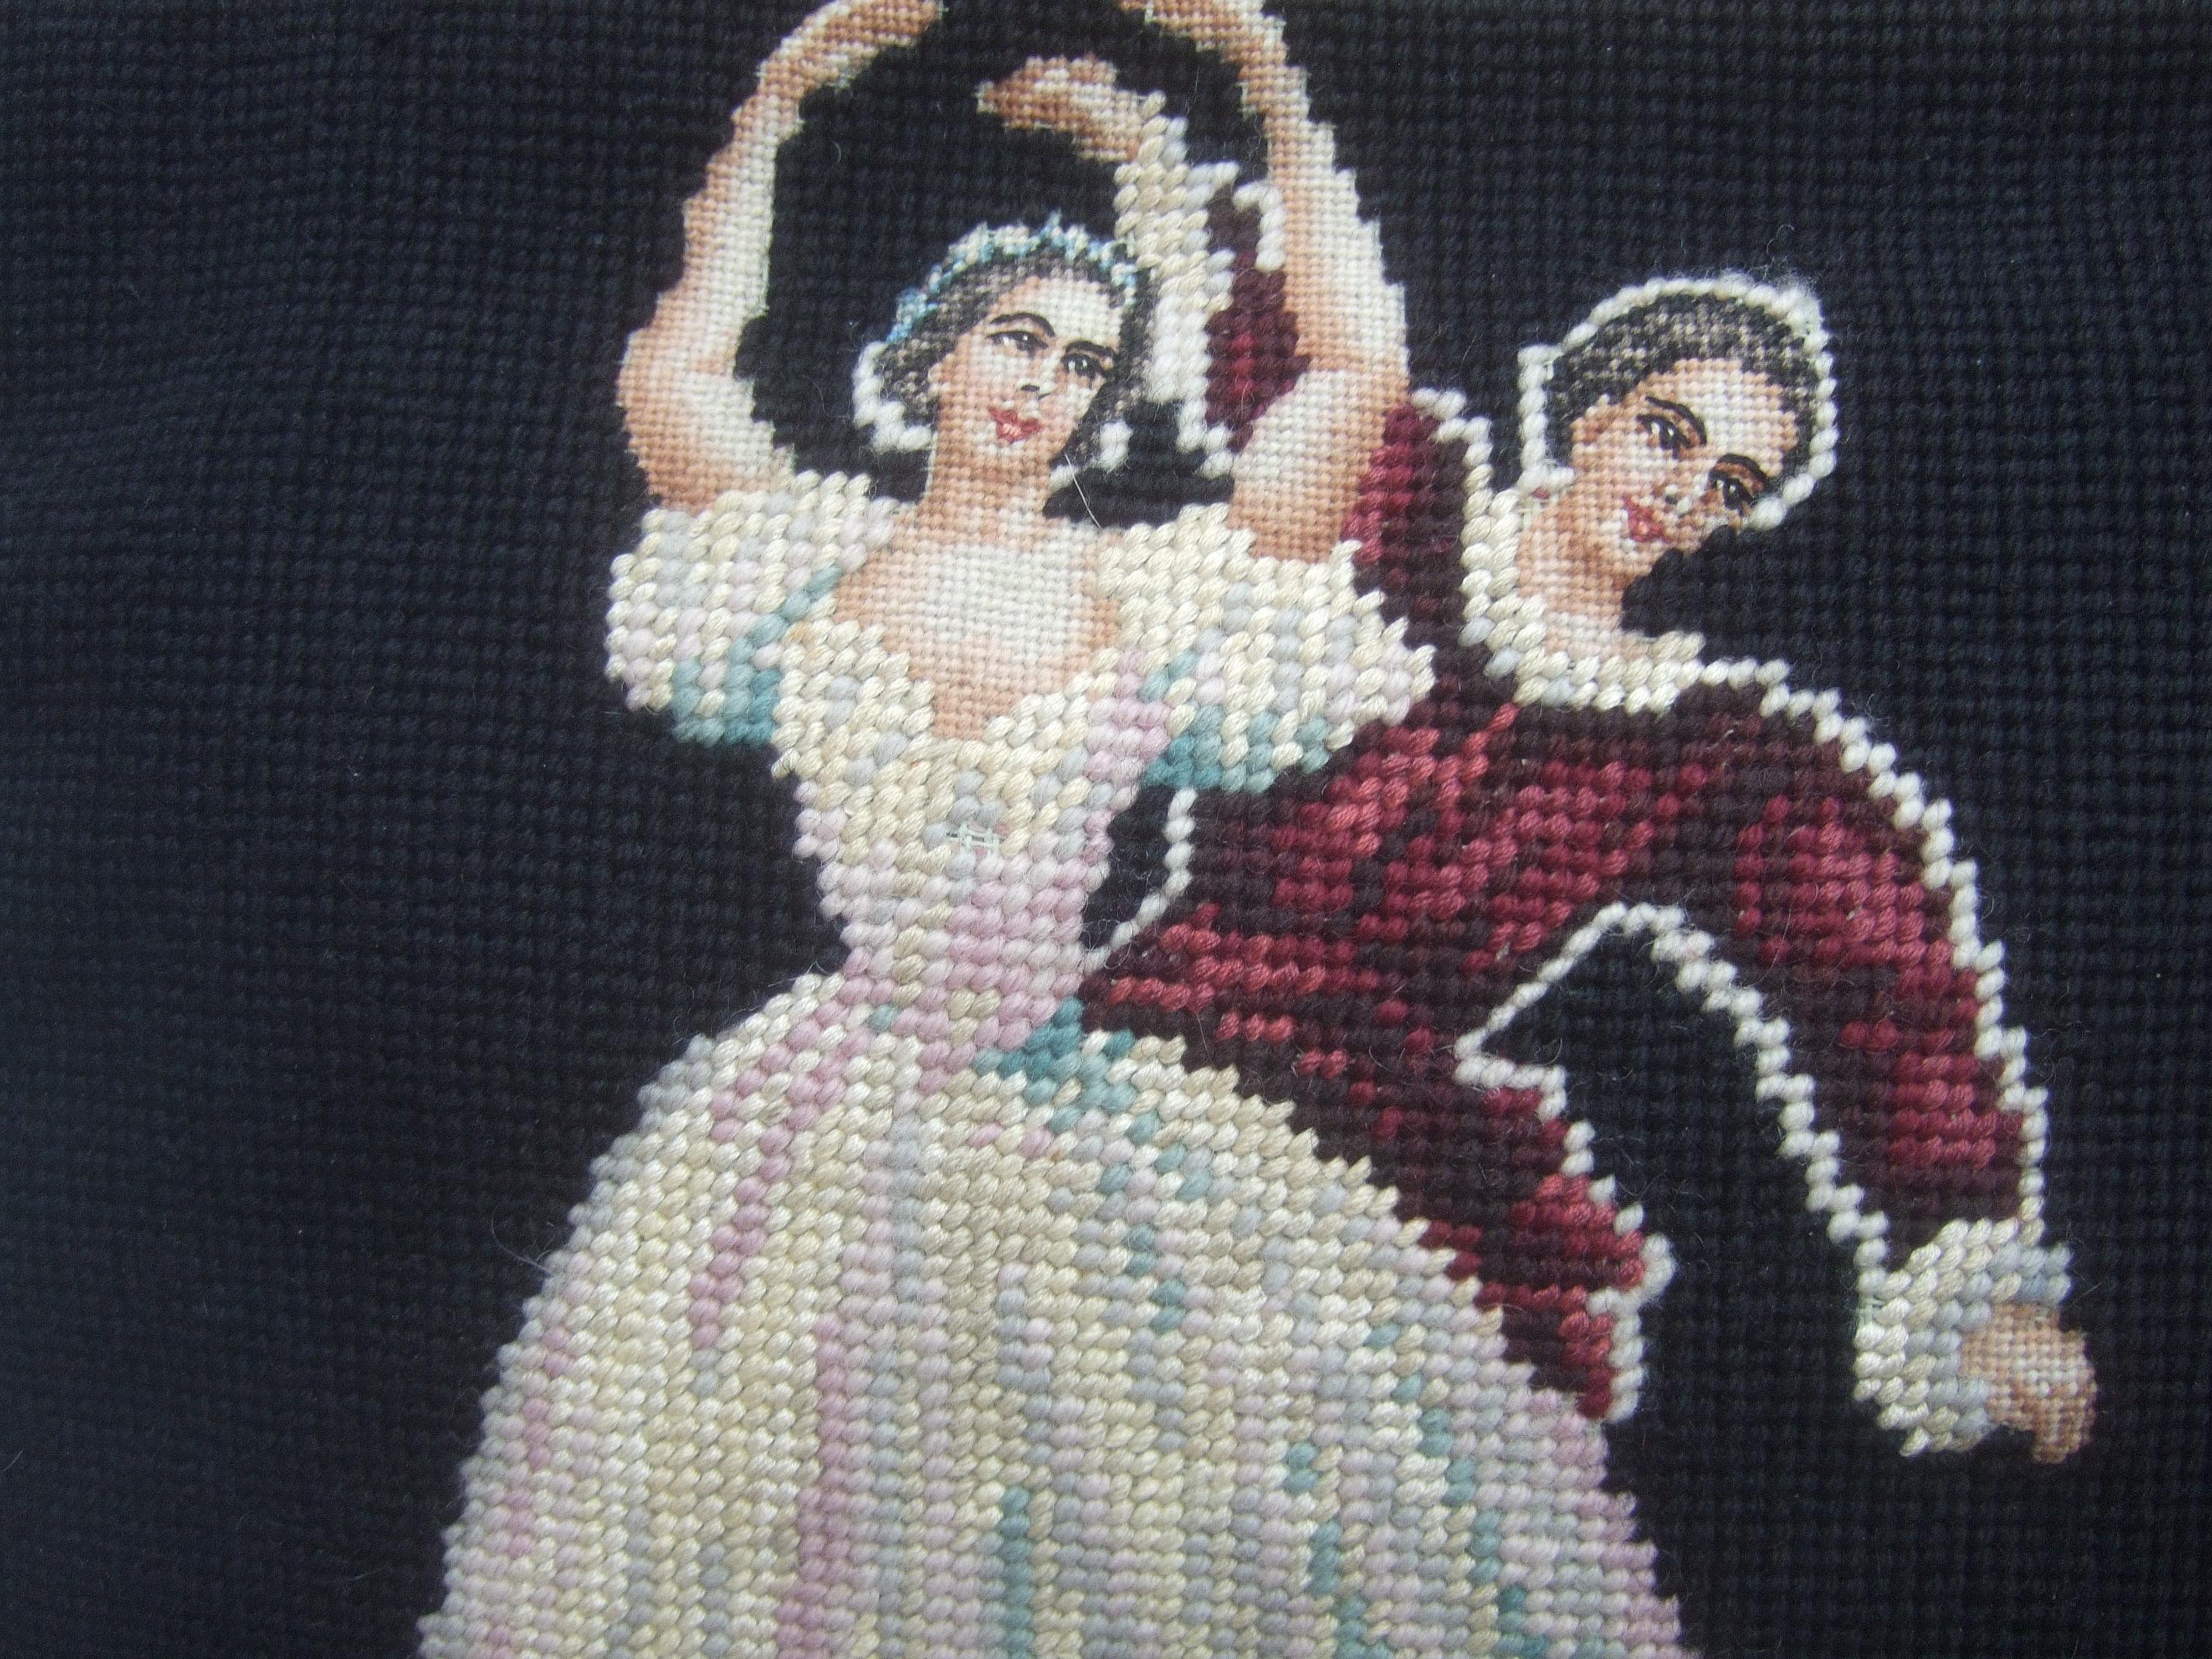 Charming needlepoint ballet scene artisan handbag c 1960
The unique artisan handbag is designed with two different ballet
scenes on both exterior sides. Illuminated against a black needlepoint 
background

Carried with a gilt metal chain strap lined